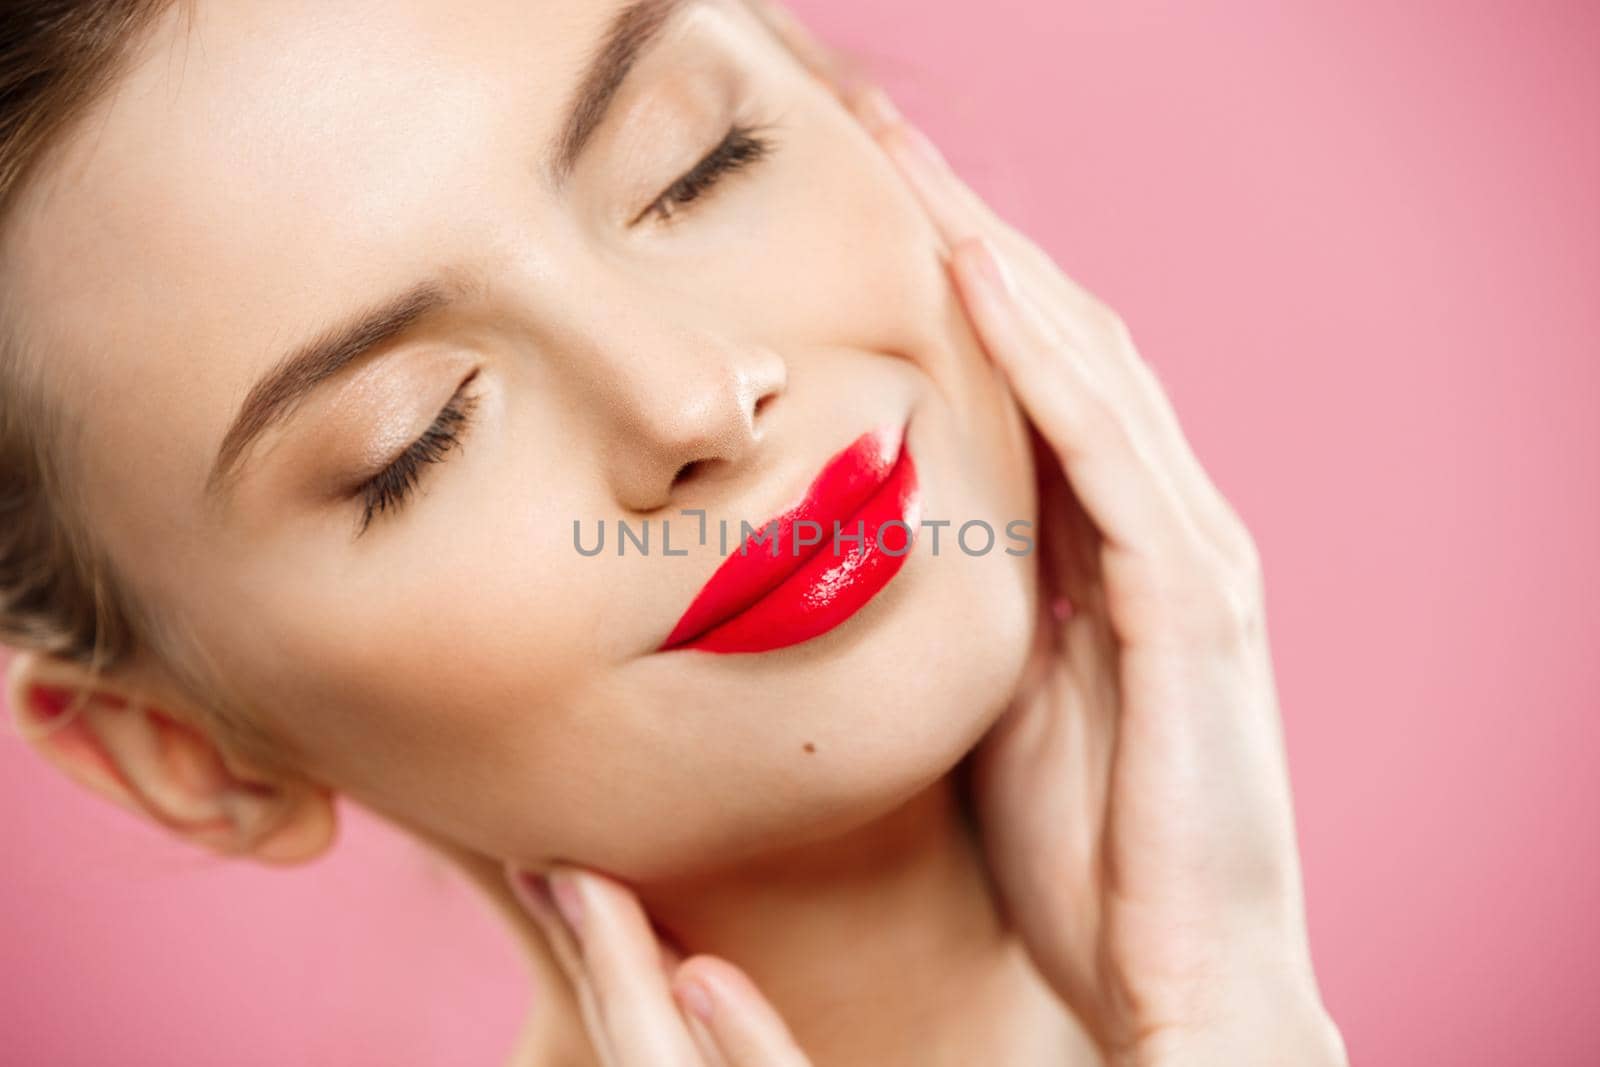 Beauty concept - Gorgeous Young Brunette Woman face portrait. Beauty Model Girl with bright eyebrows, perfect make-up, red lips, touching her face. Isolated on pink background